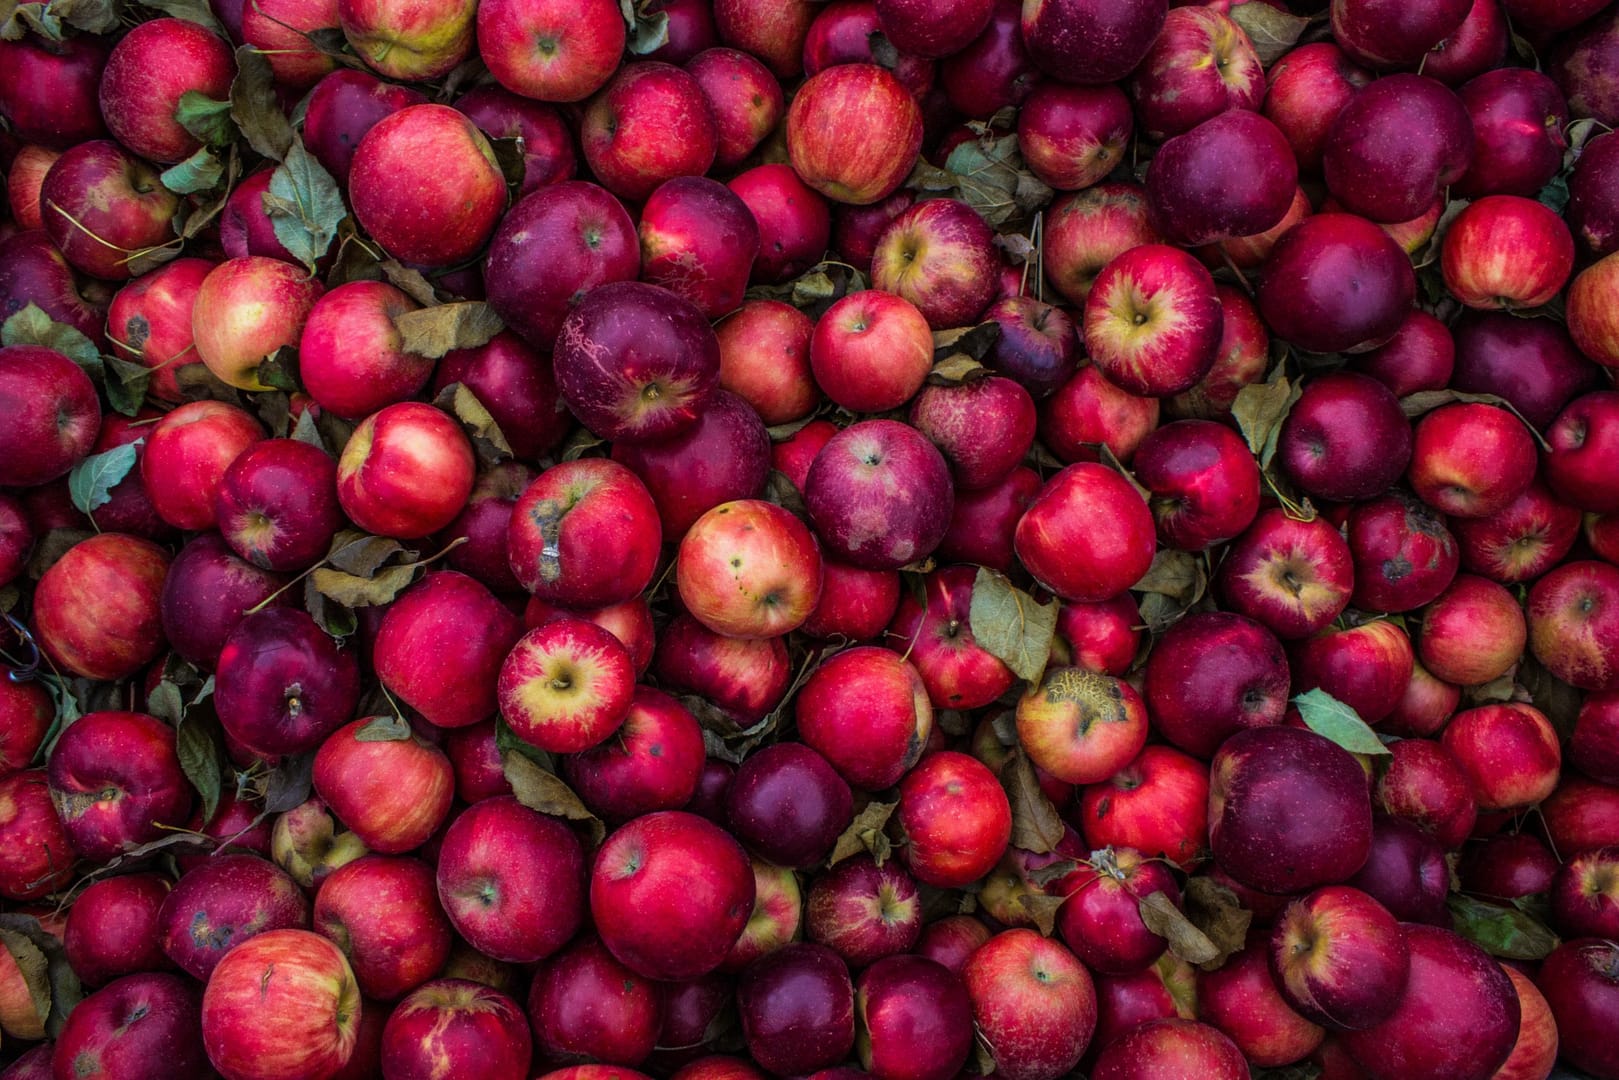 Close up full bleed image of red apples of different sizes